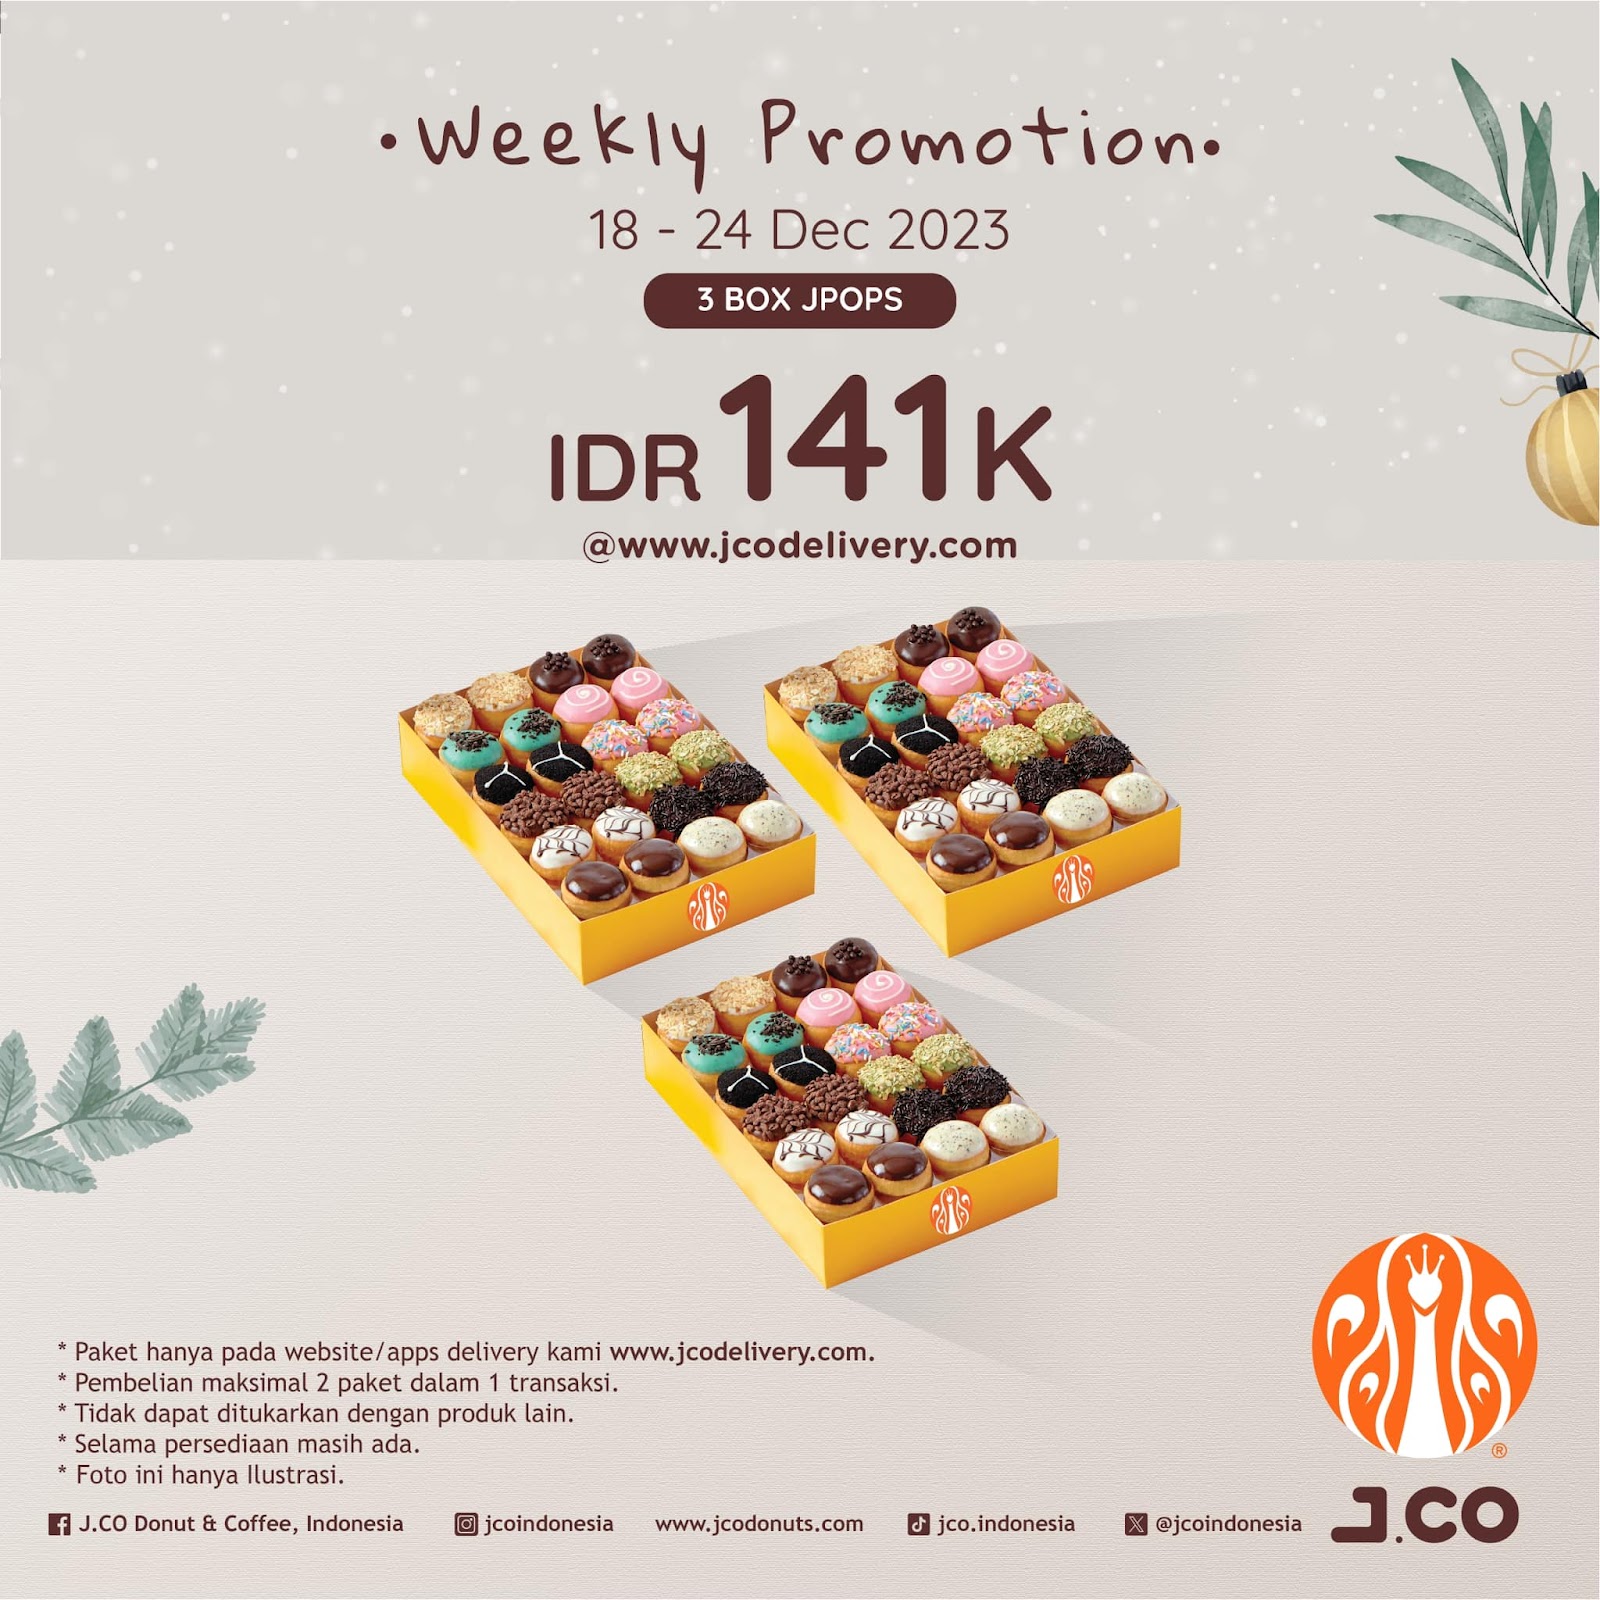 Promo JCO Donuts Weekly Promotion Periode 18 - 24 Desember 2023